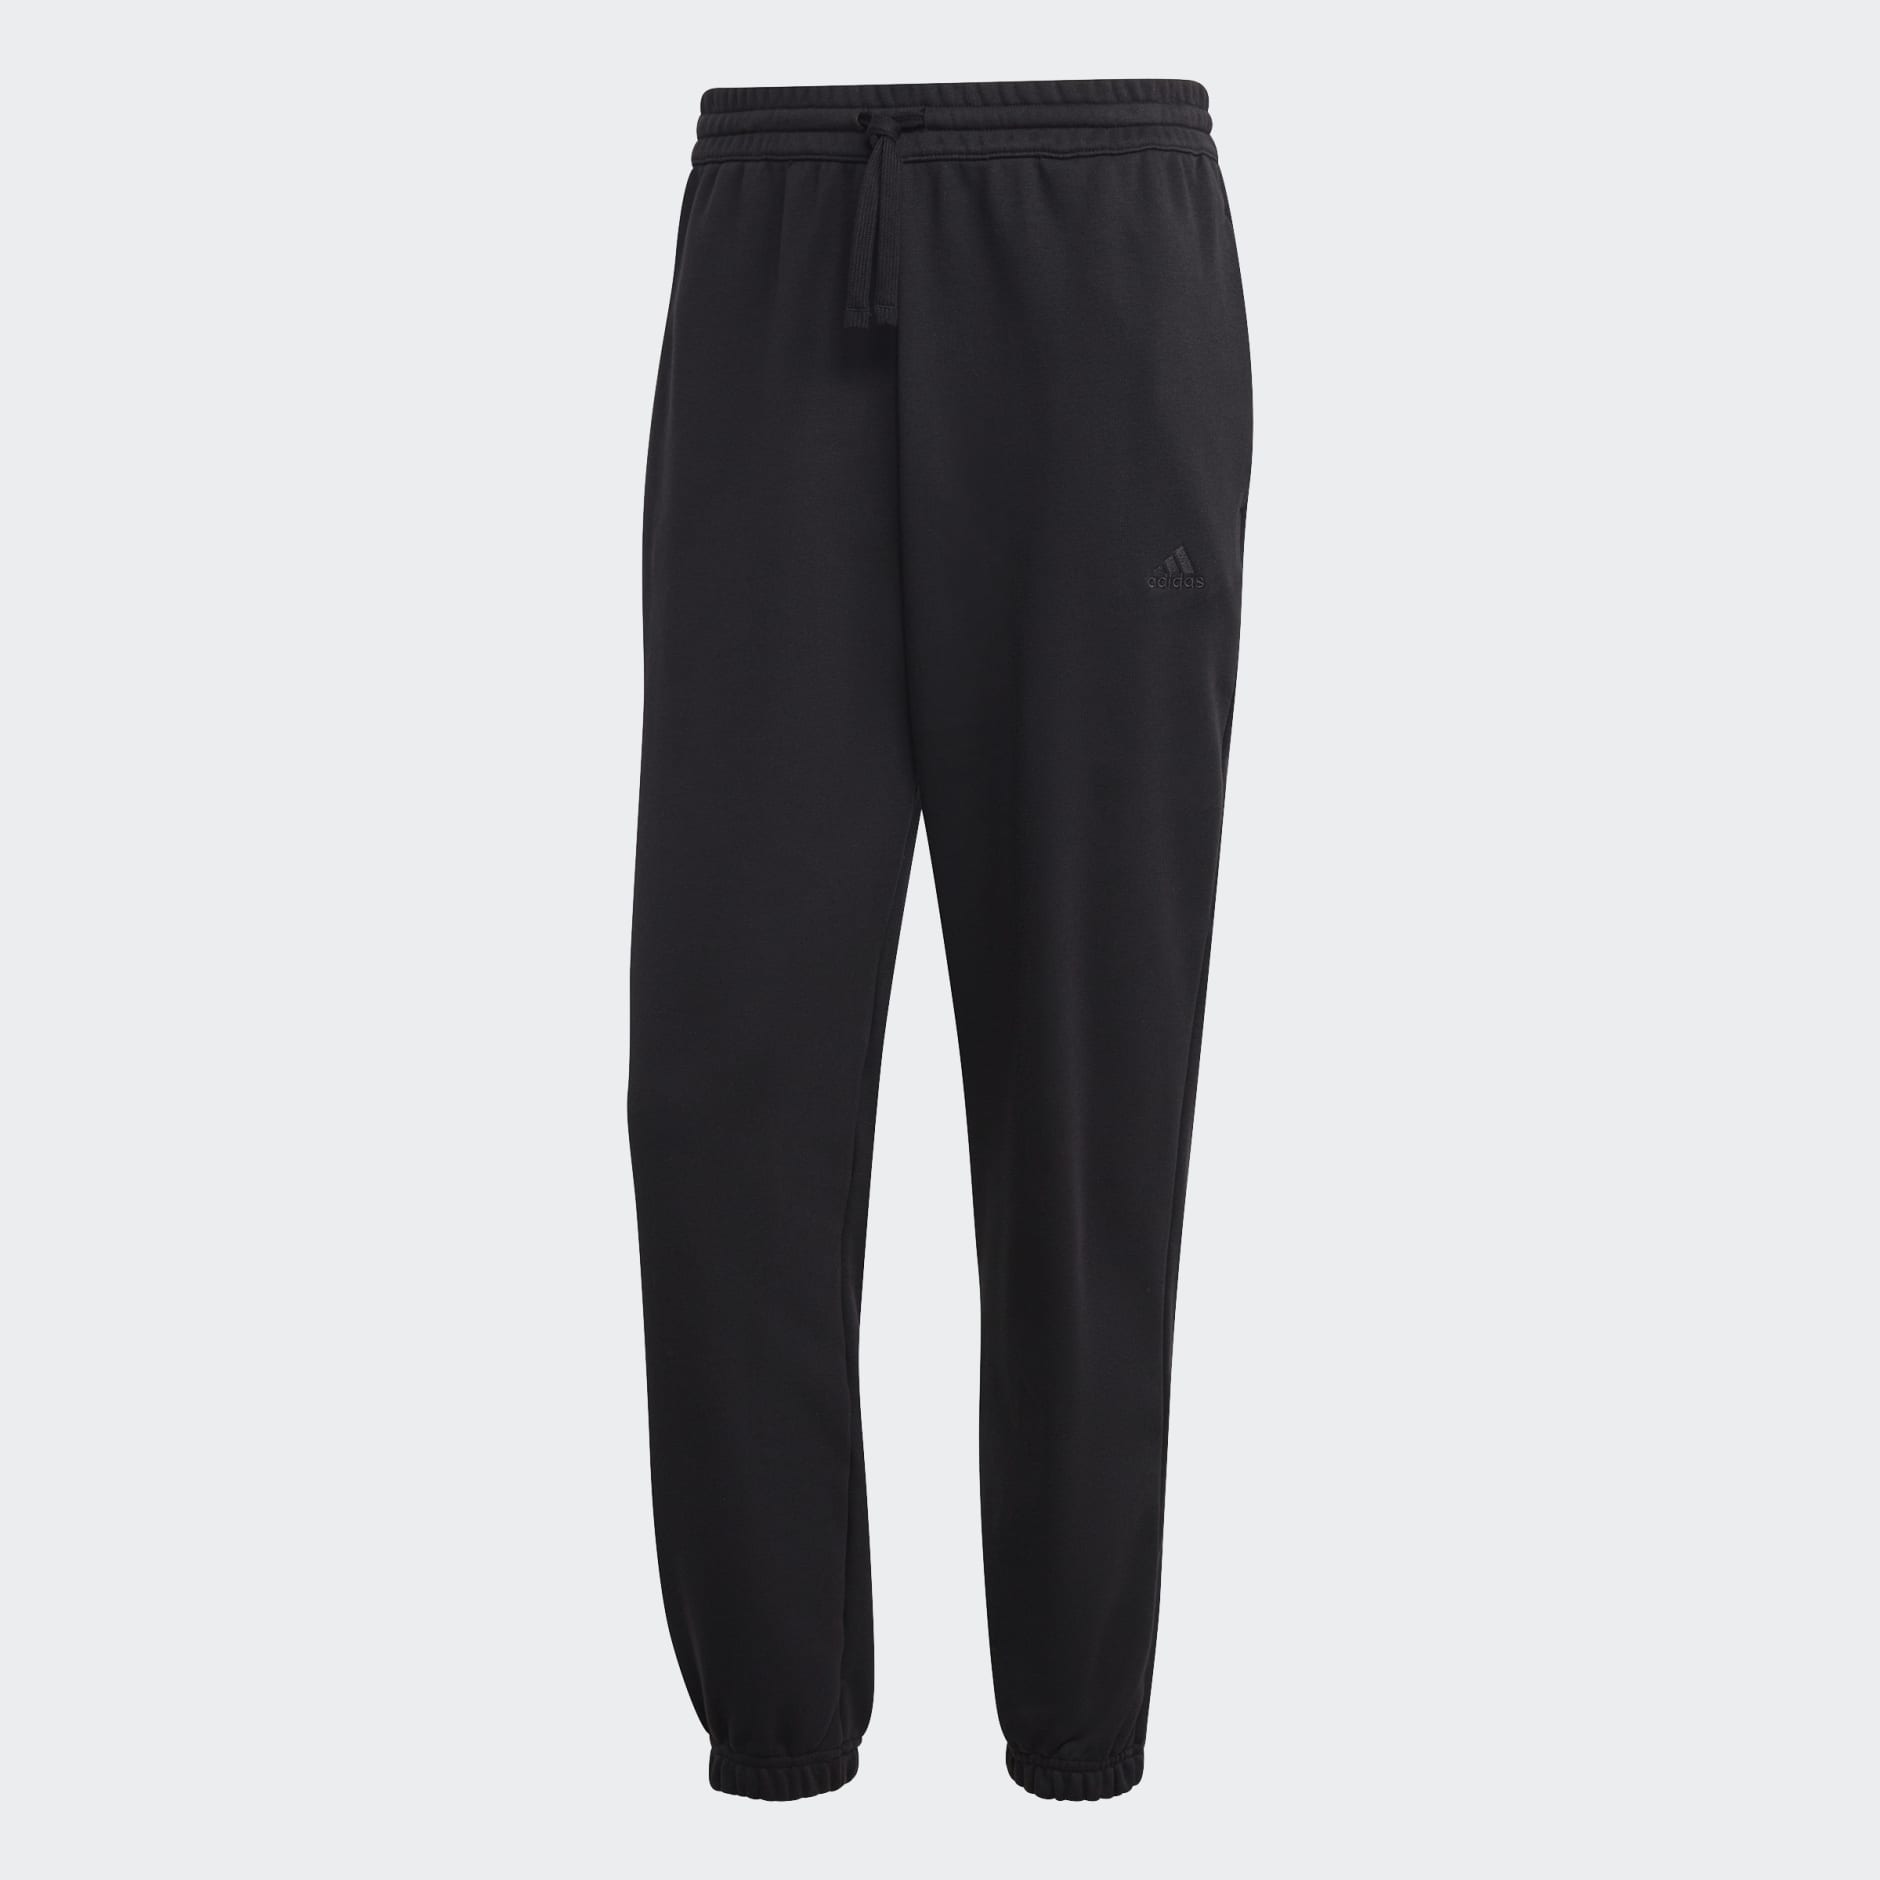 adidas ALL SZN French Terry Pants - Black